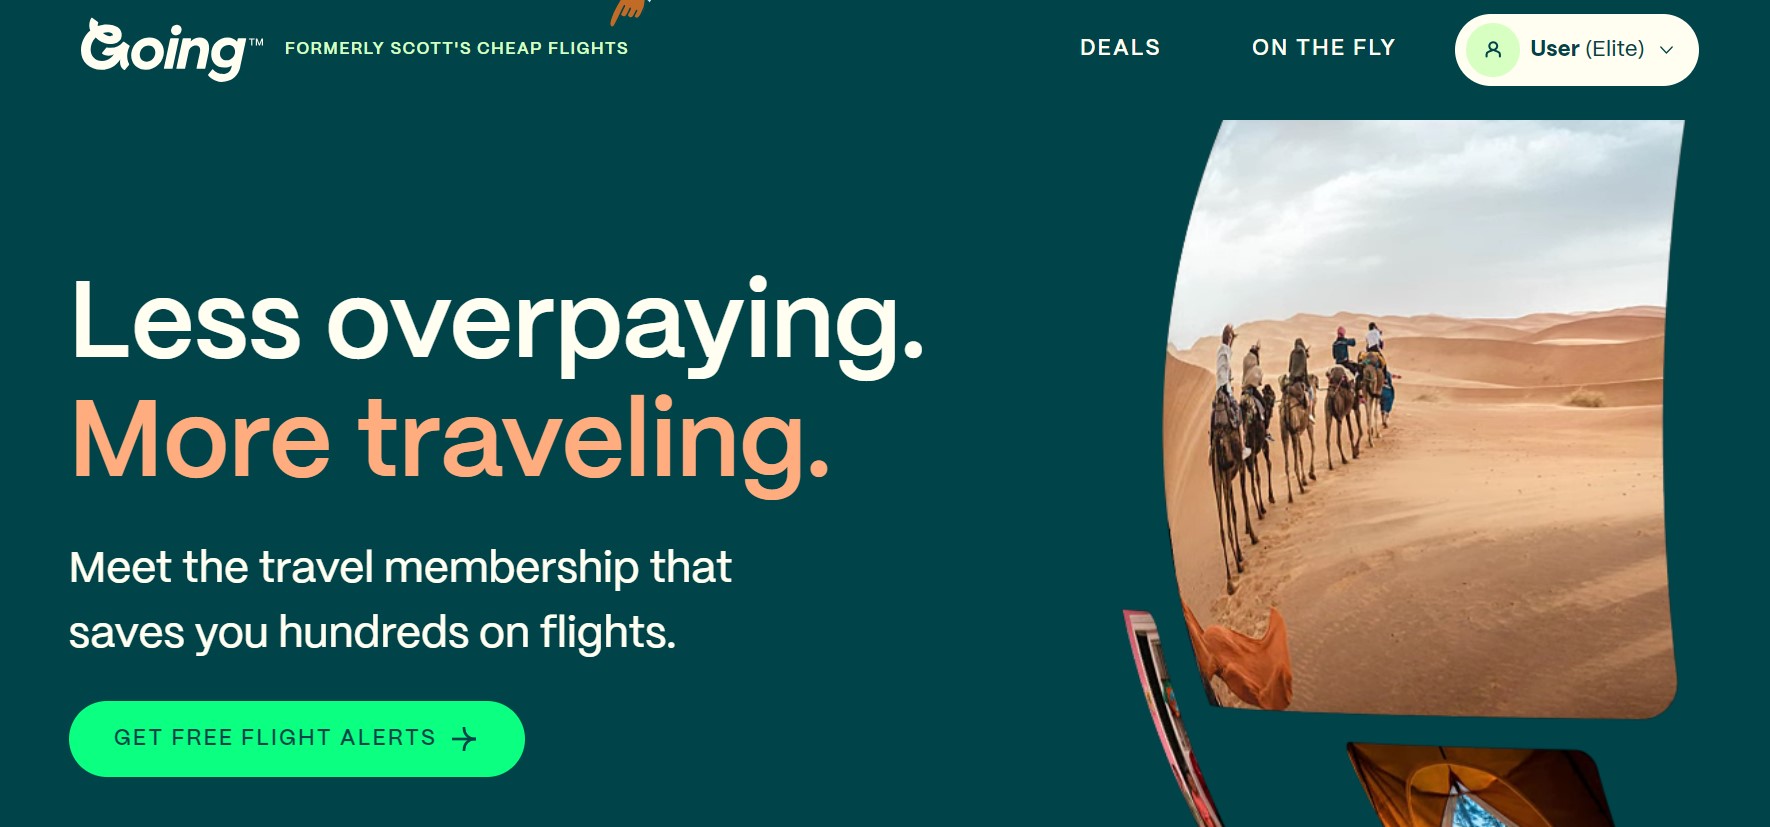 The front page of the Going travel website with huge text stating 'less overpaying, more traveling'